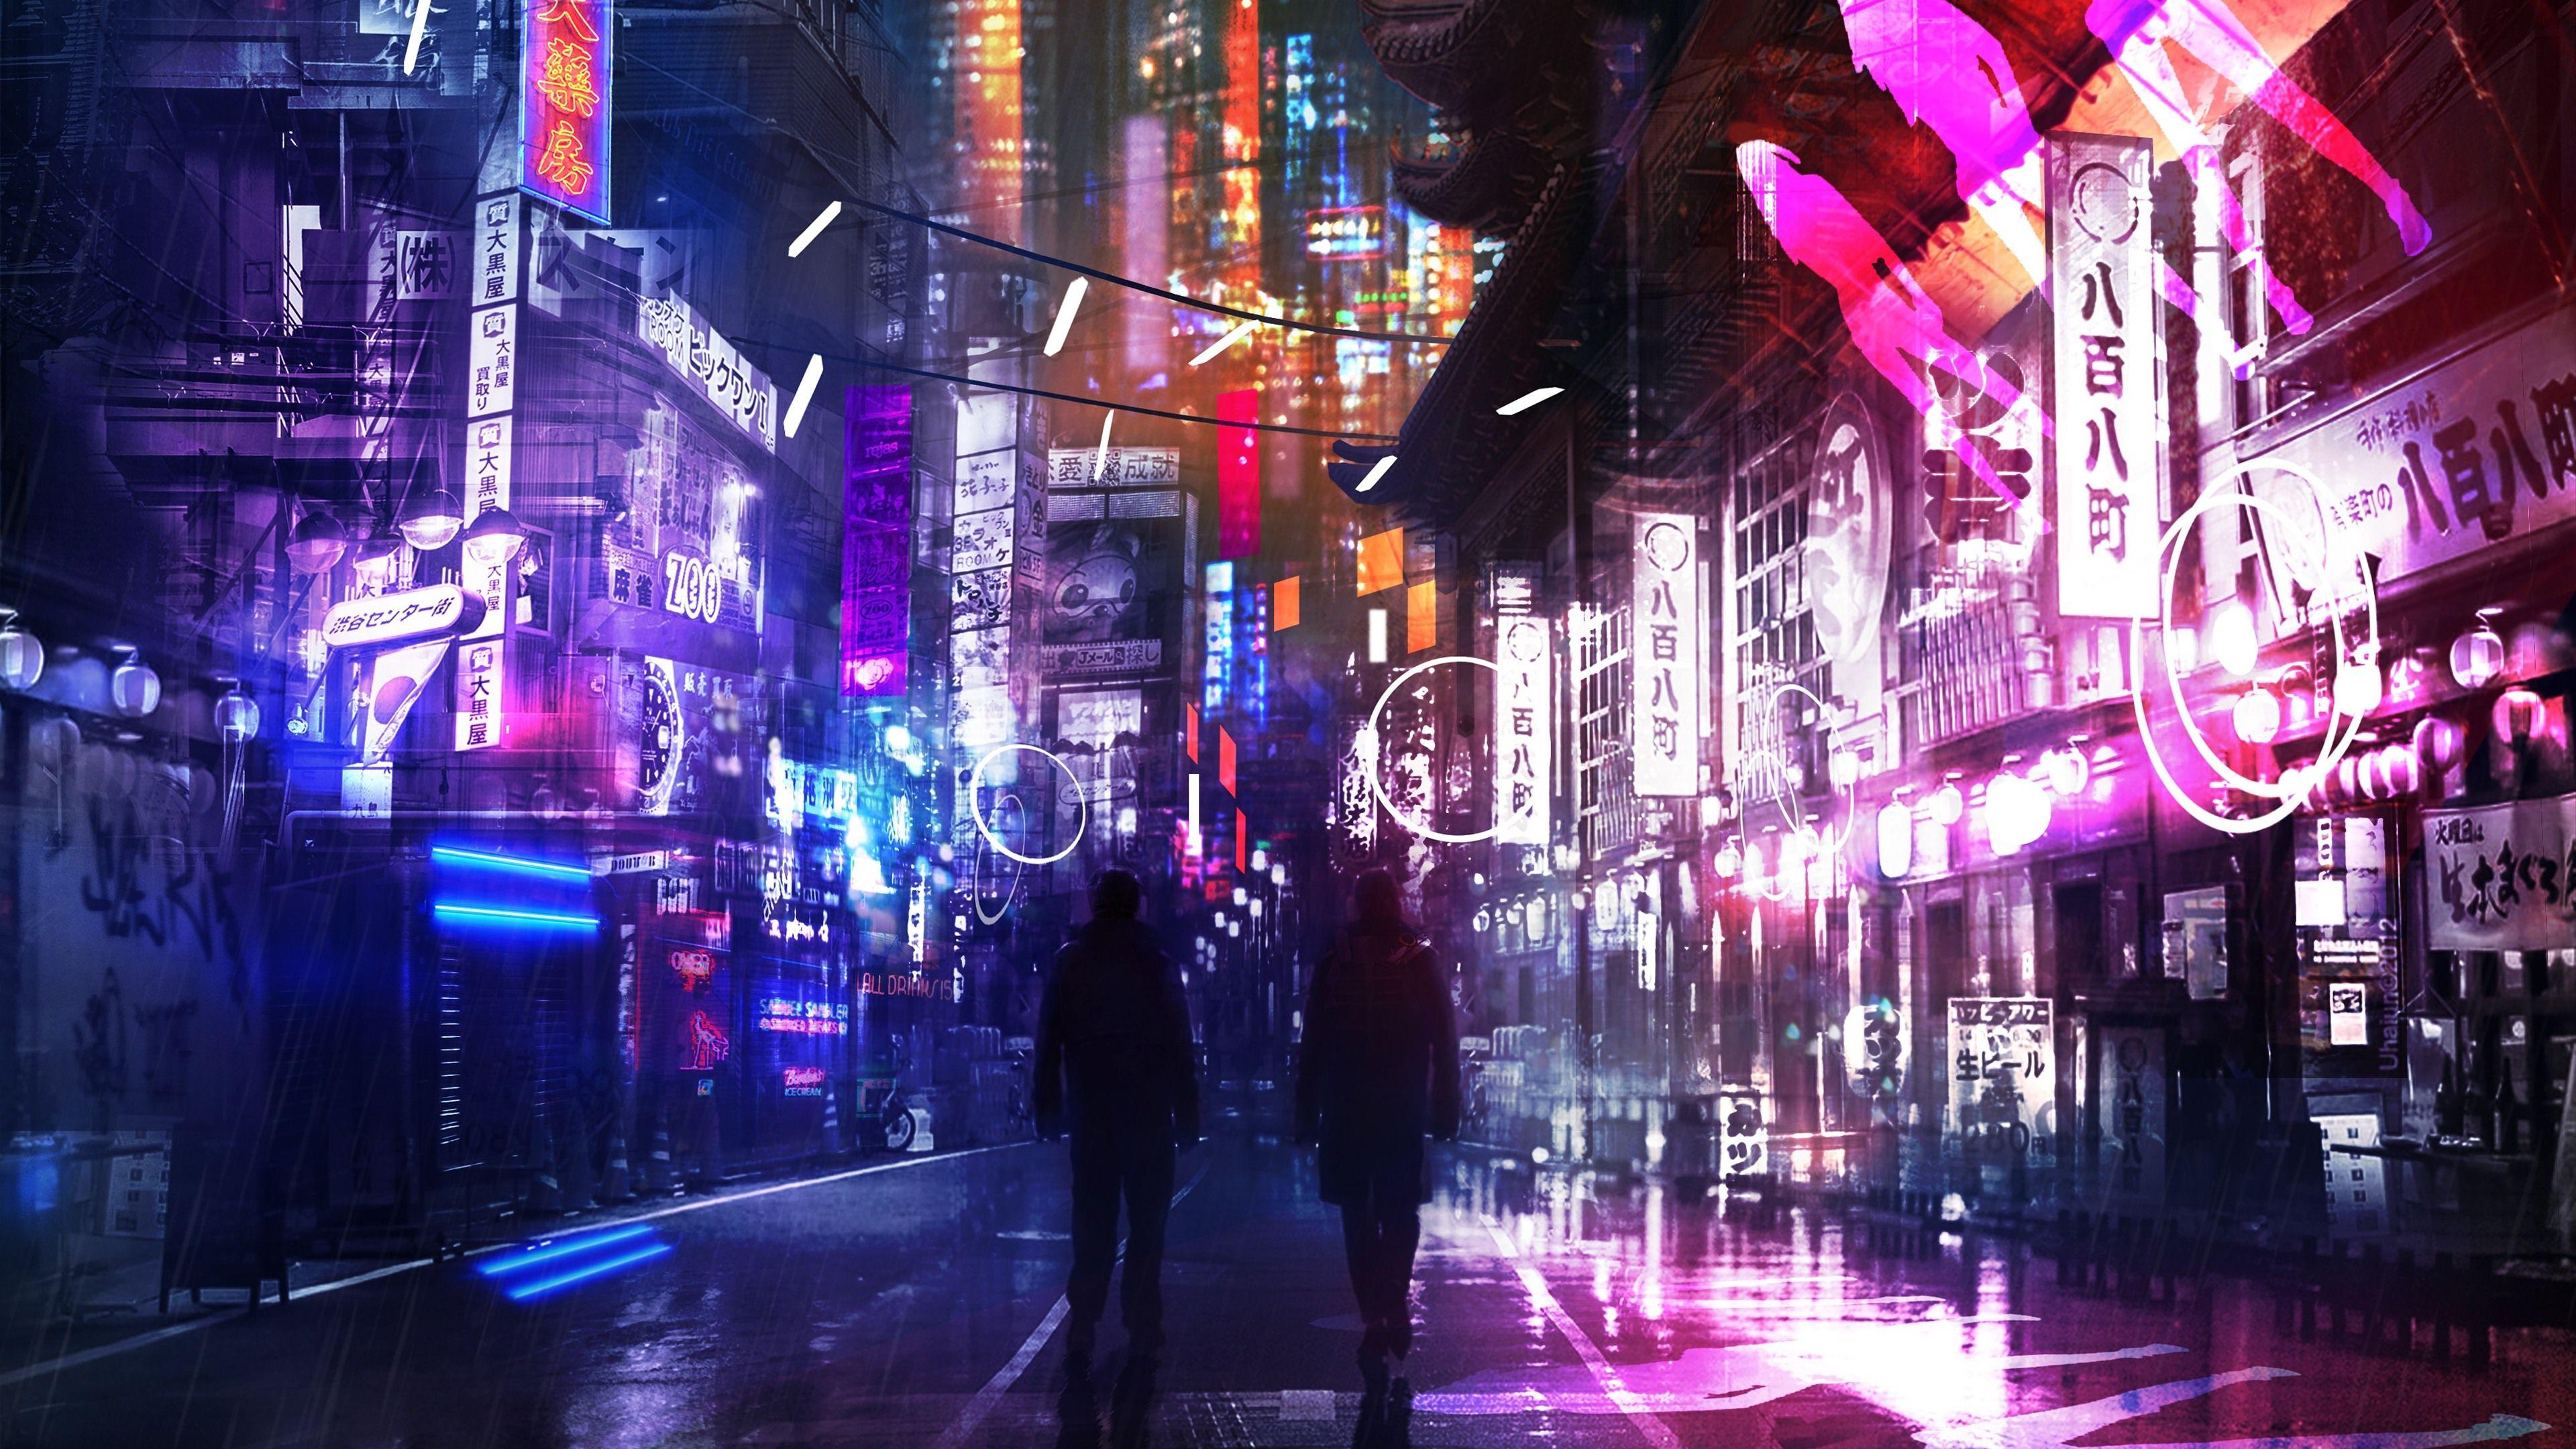 Anime Neon City Wallpapers - Top Free Anime Neon City Backgrounds